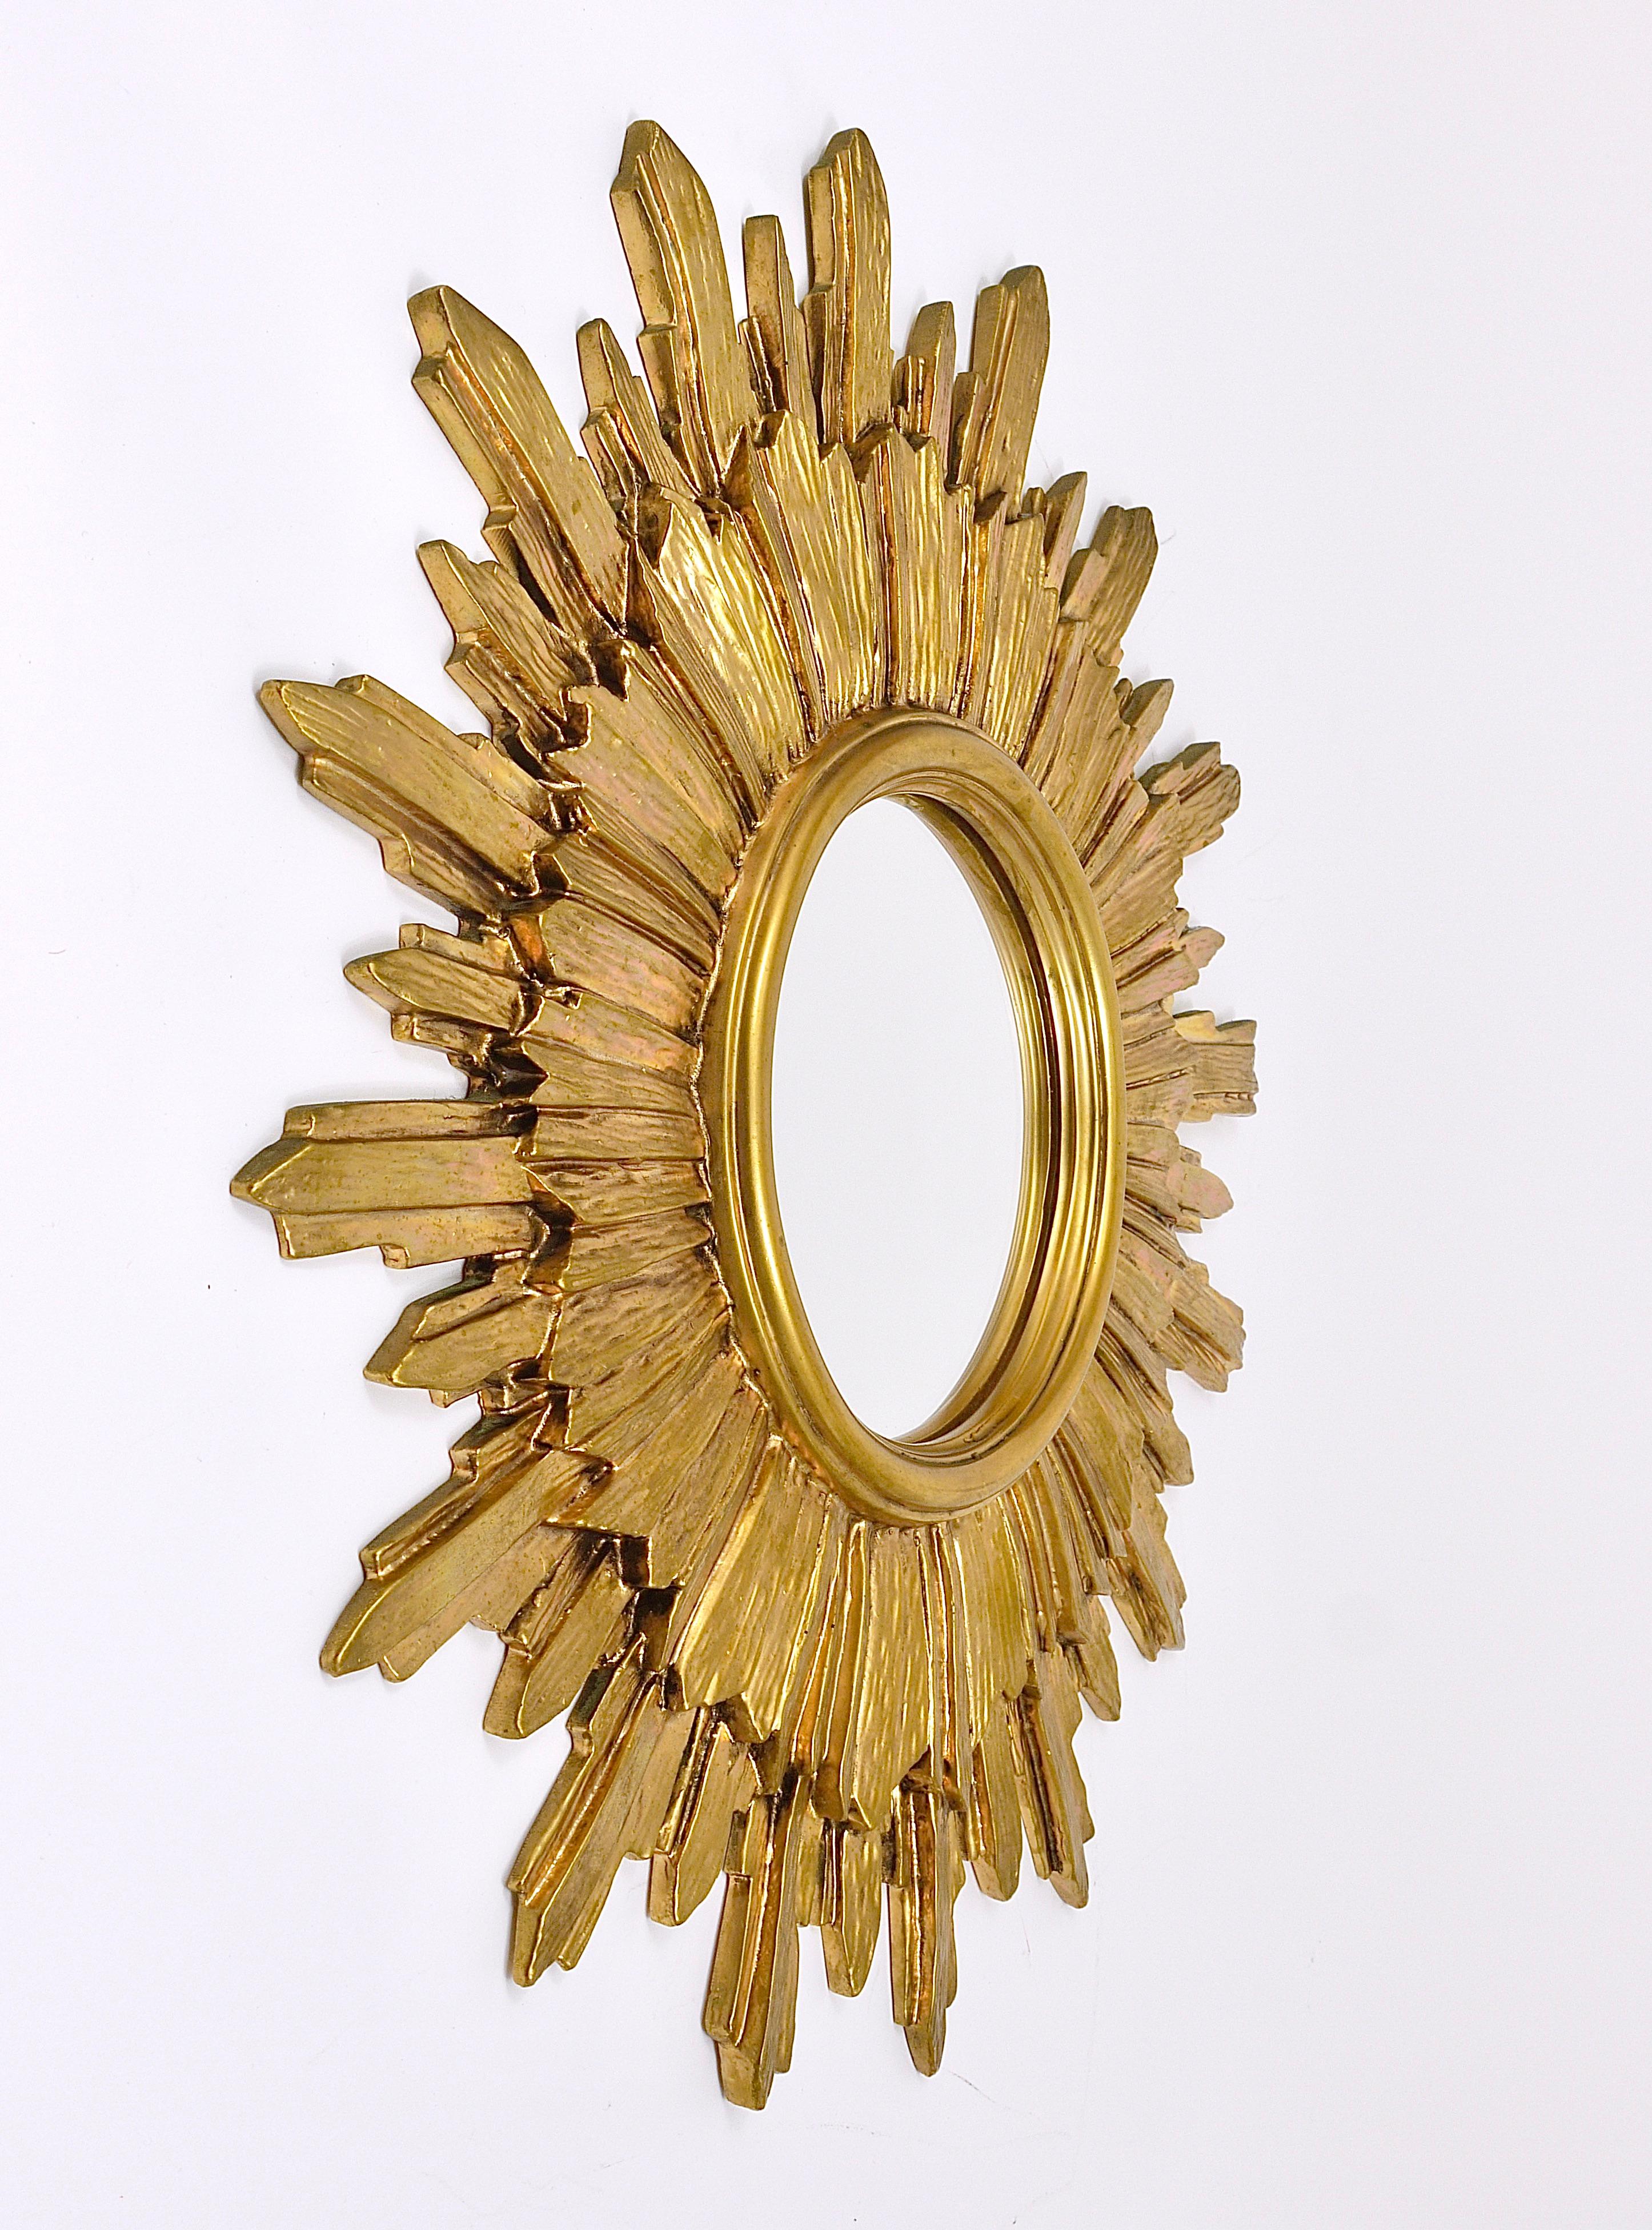 A very beautiful and decorative golden mid-century sunburst starburst mirror. Made in France in the 1960s. Made of resin, in good condition. Total diameter 20“, the diameter of the mirror itself is 6 3/4“.